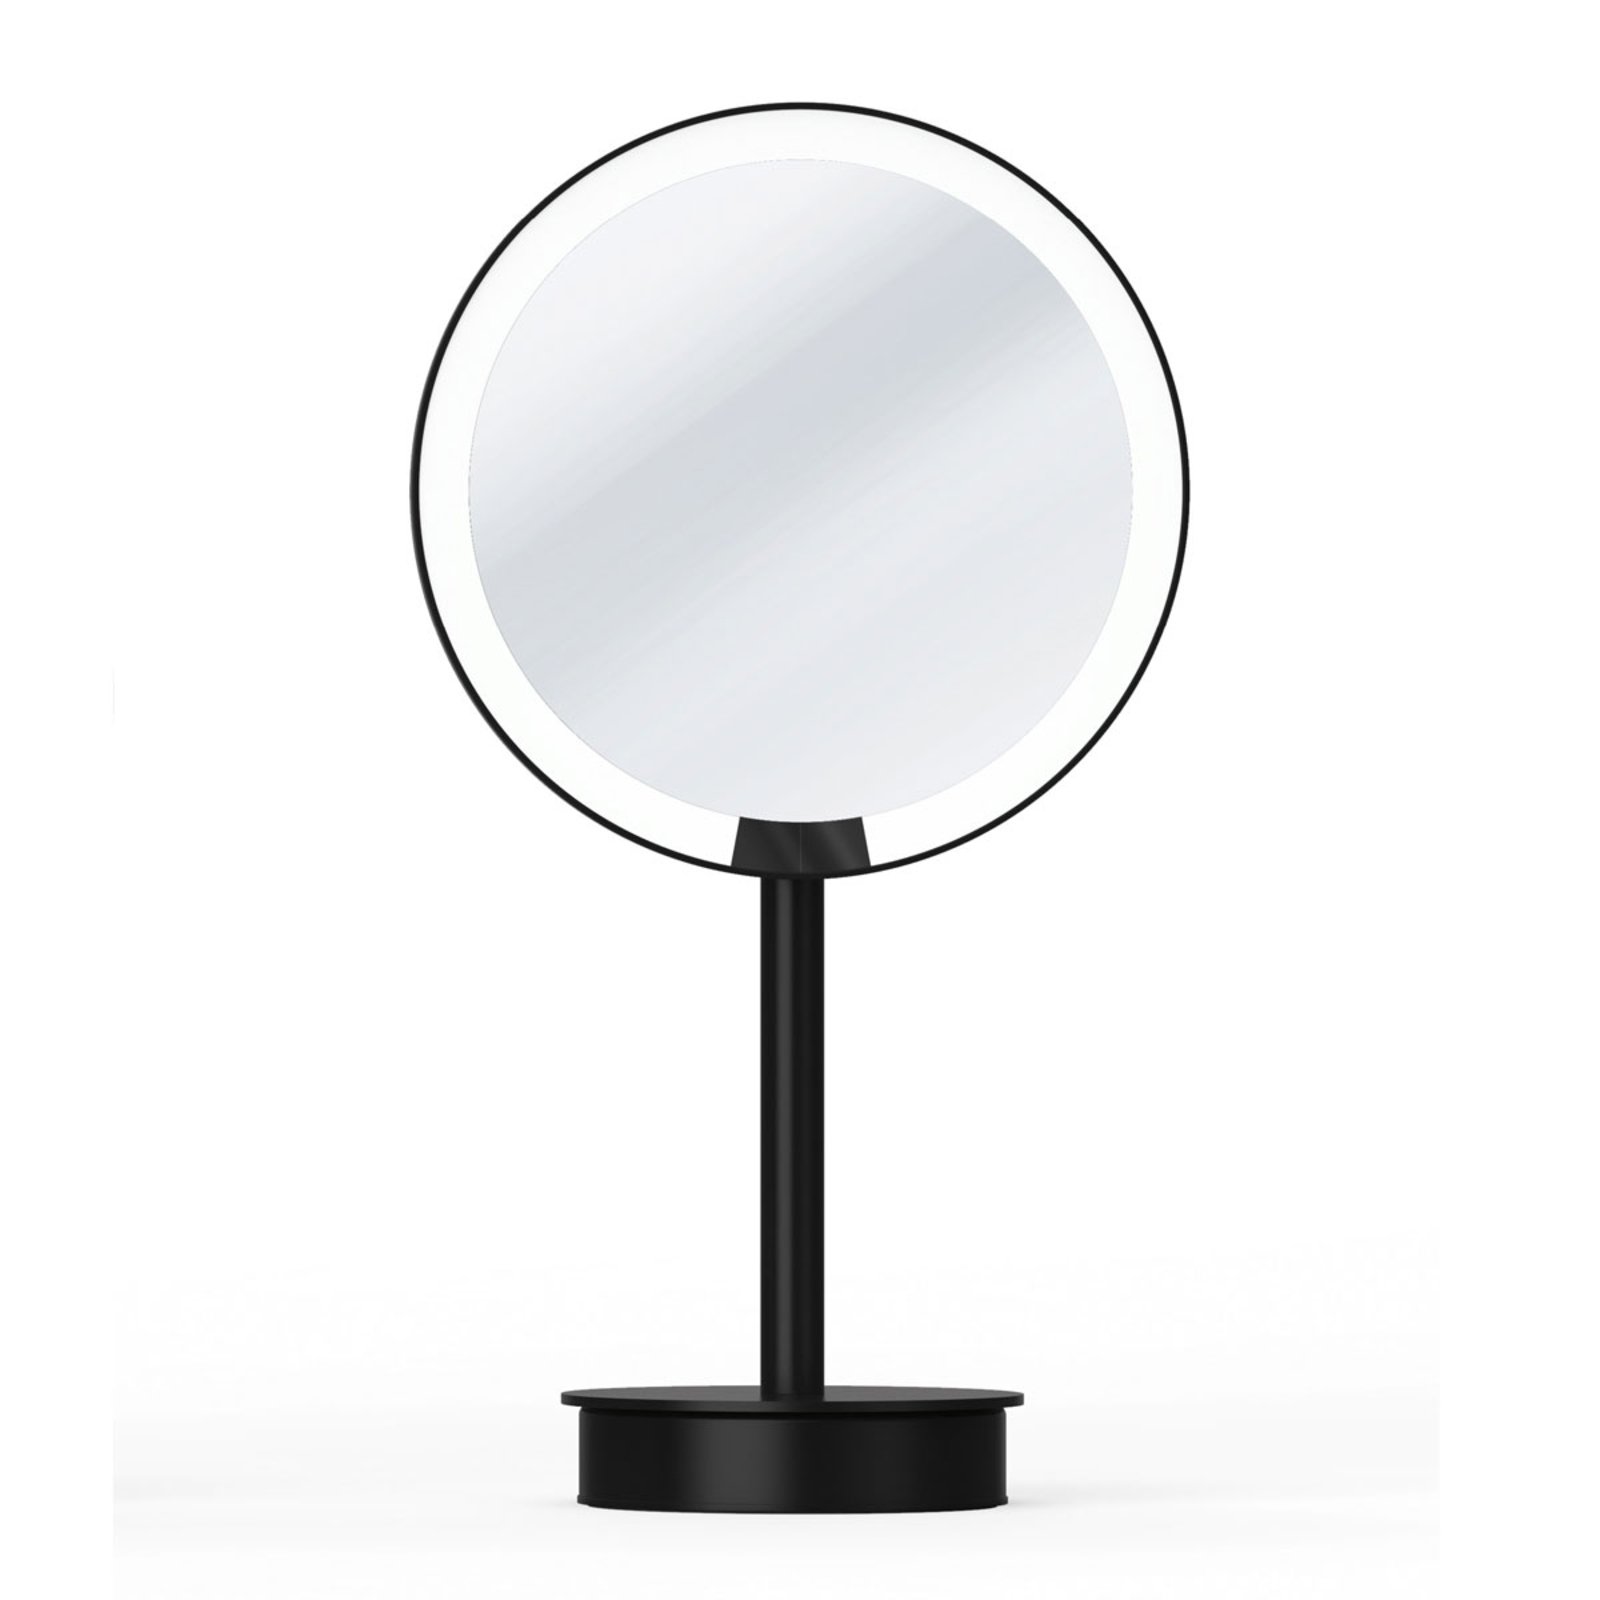 Decor Walther Just Look SR table mirror, black